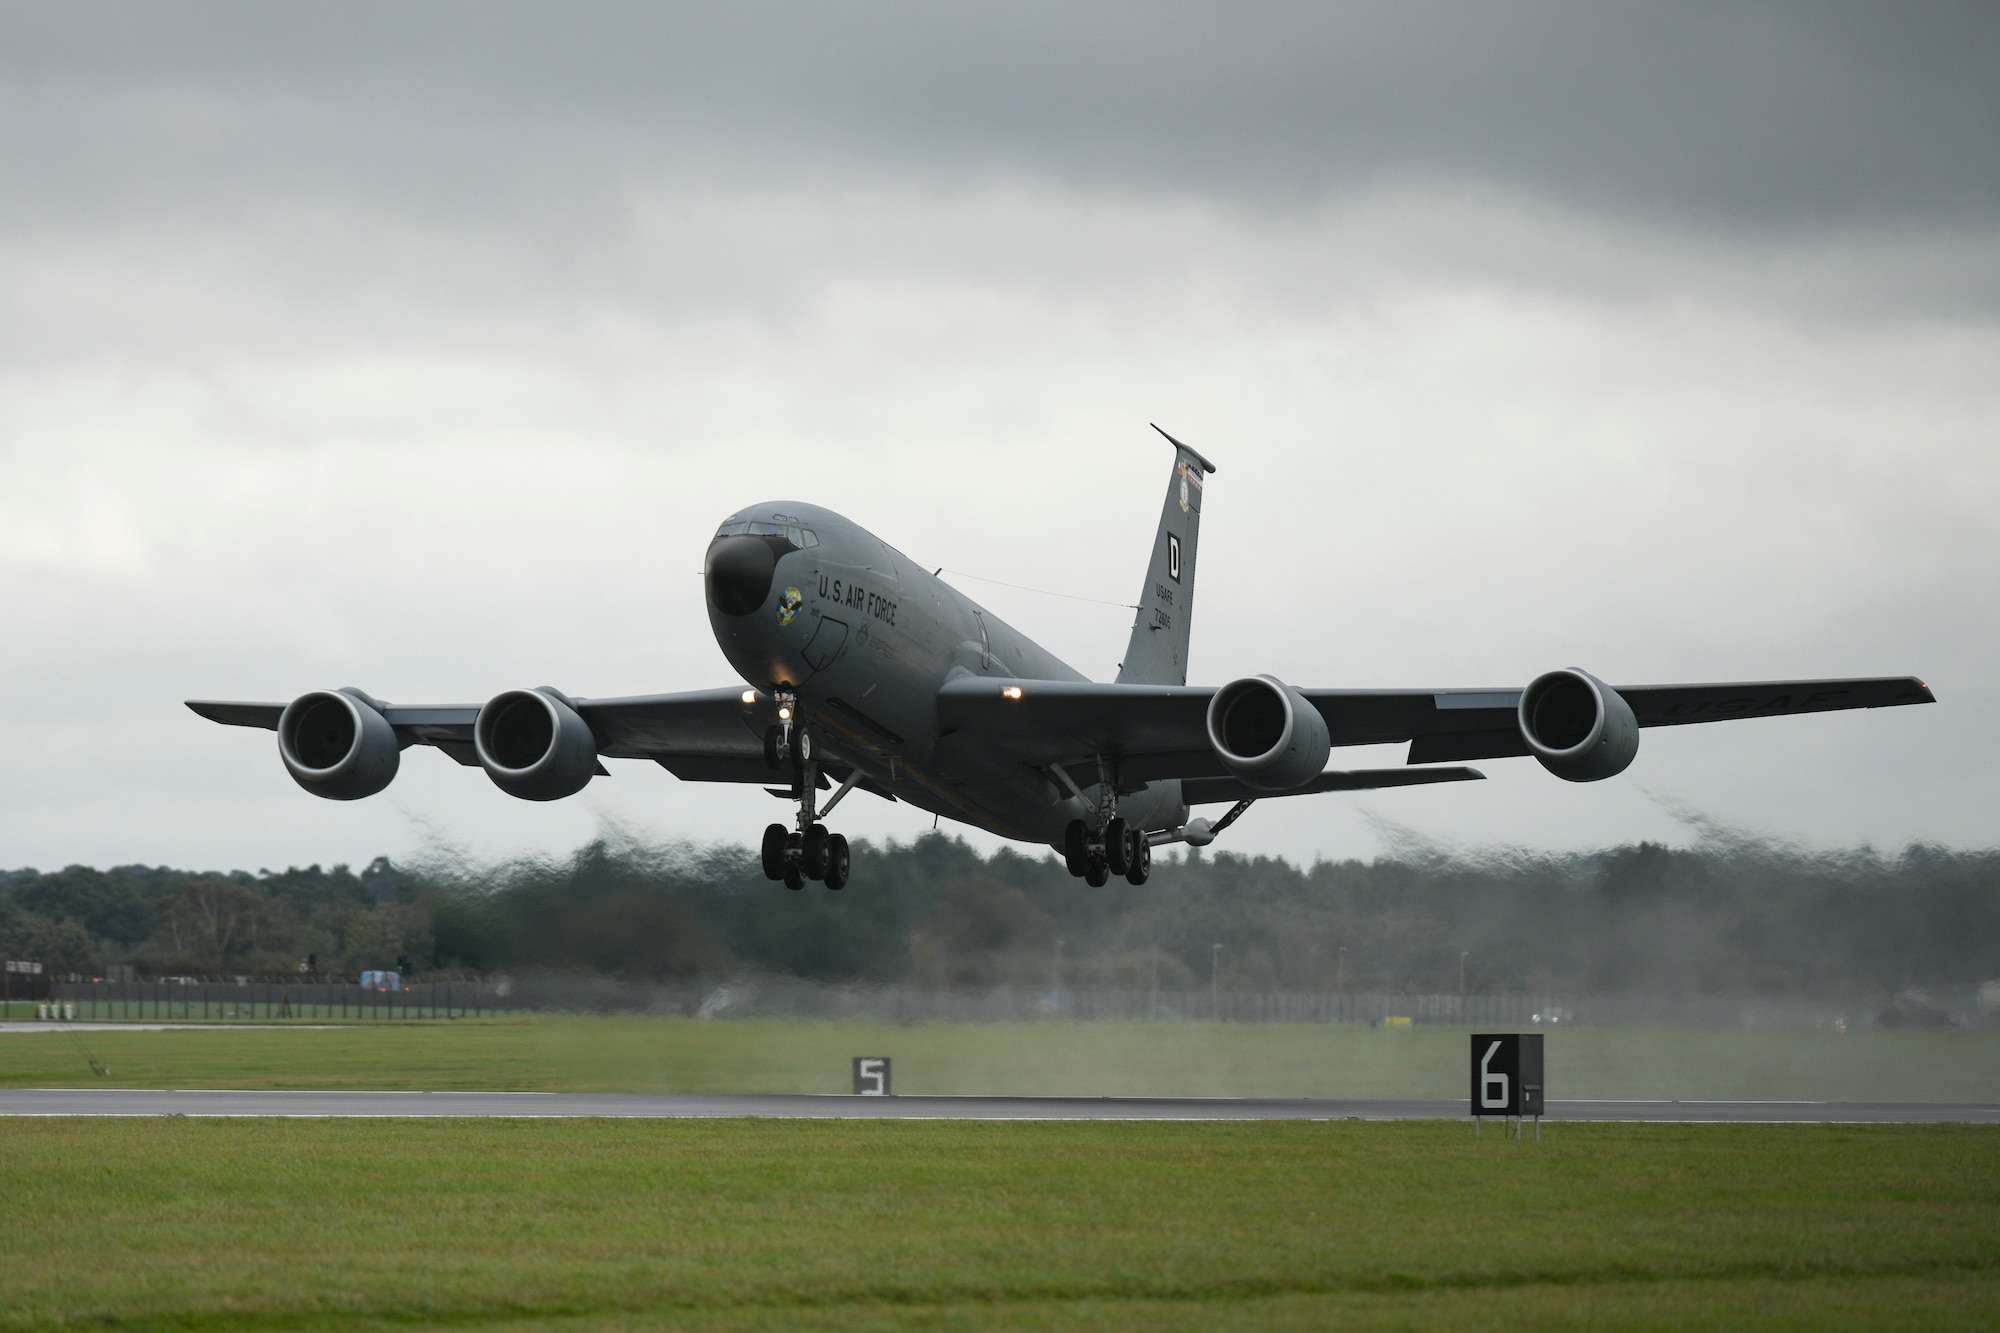 A U.S. Air Force KC-135 Stratotanker aircraft assigned to the 100th Air Refueling Wing takes off at Royal Air Force Mildenhall, England, Oct. 8, 2020. The 100th ARW is the only permanent U.S. air refueling wing in the European theater, providing the critical air refueling "bridge" which allows the expeditionary Air Force to deploy around the globe at a moment's notice. (U.S. Air Force photo by Staff Sgt. Lexie West)